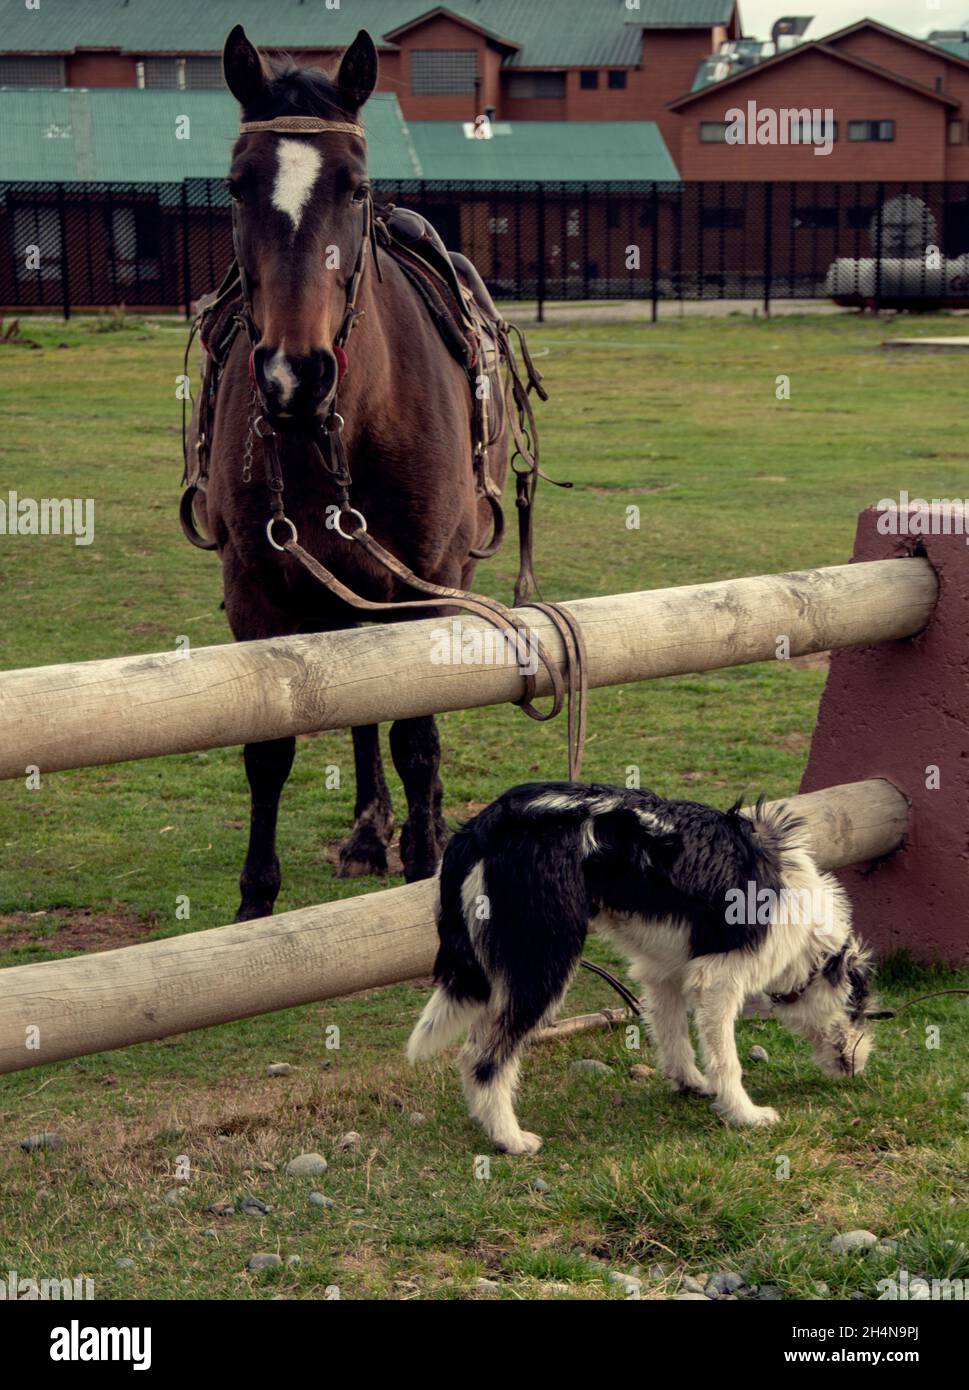 Black and white dog in front of a saddled horse tied to wood post fence Stock Photo